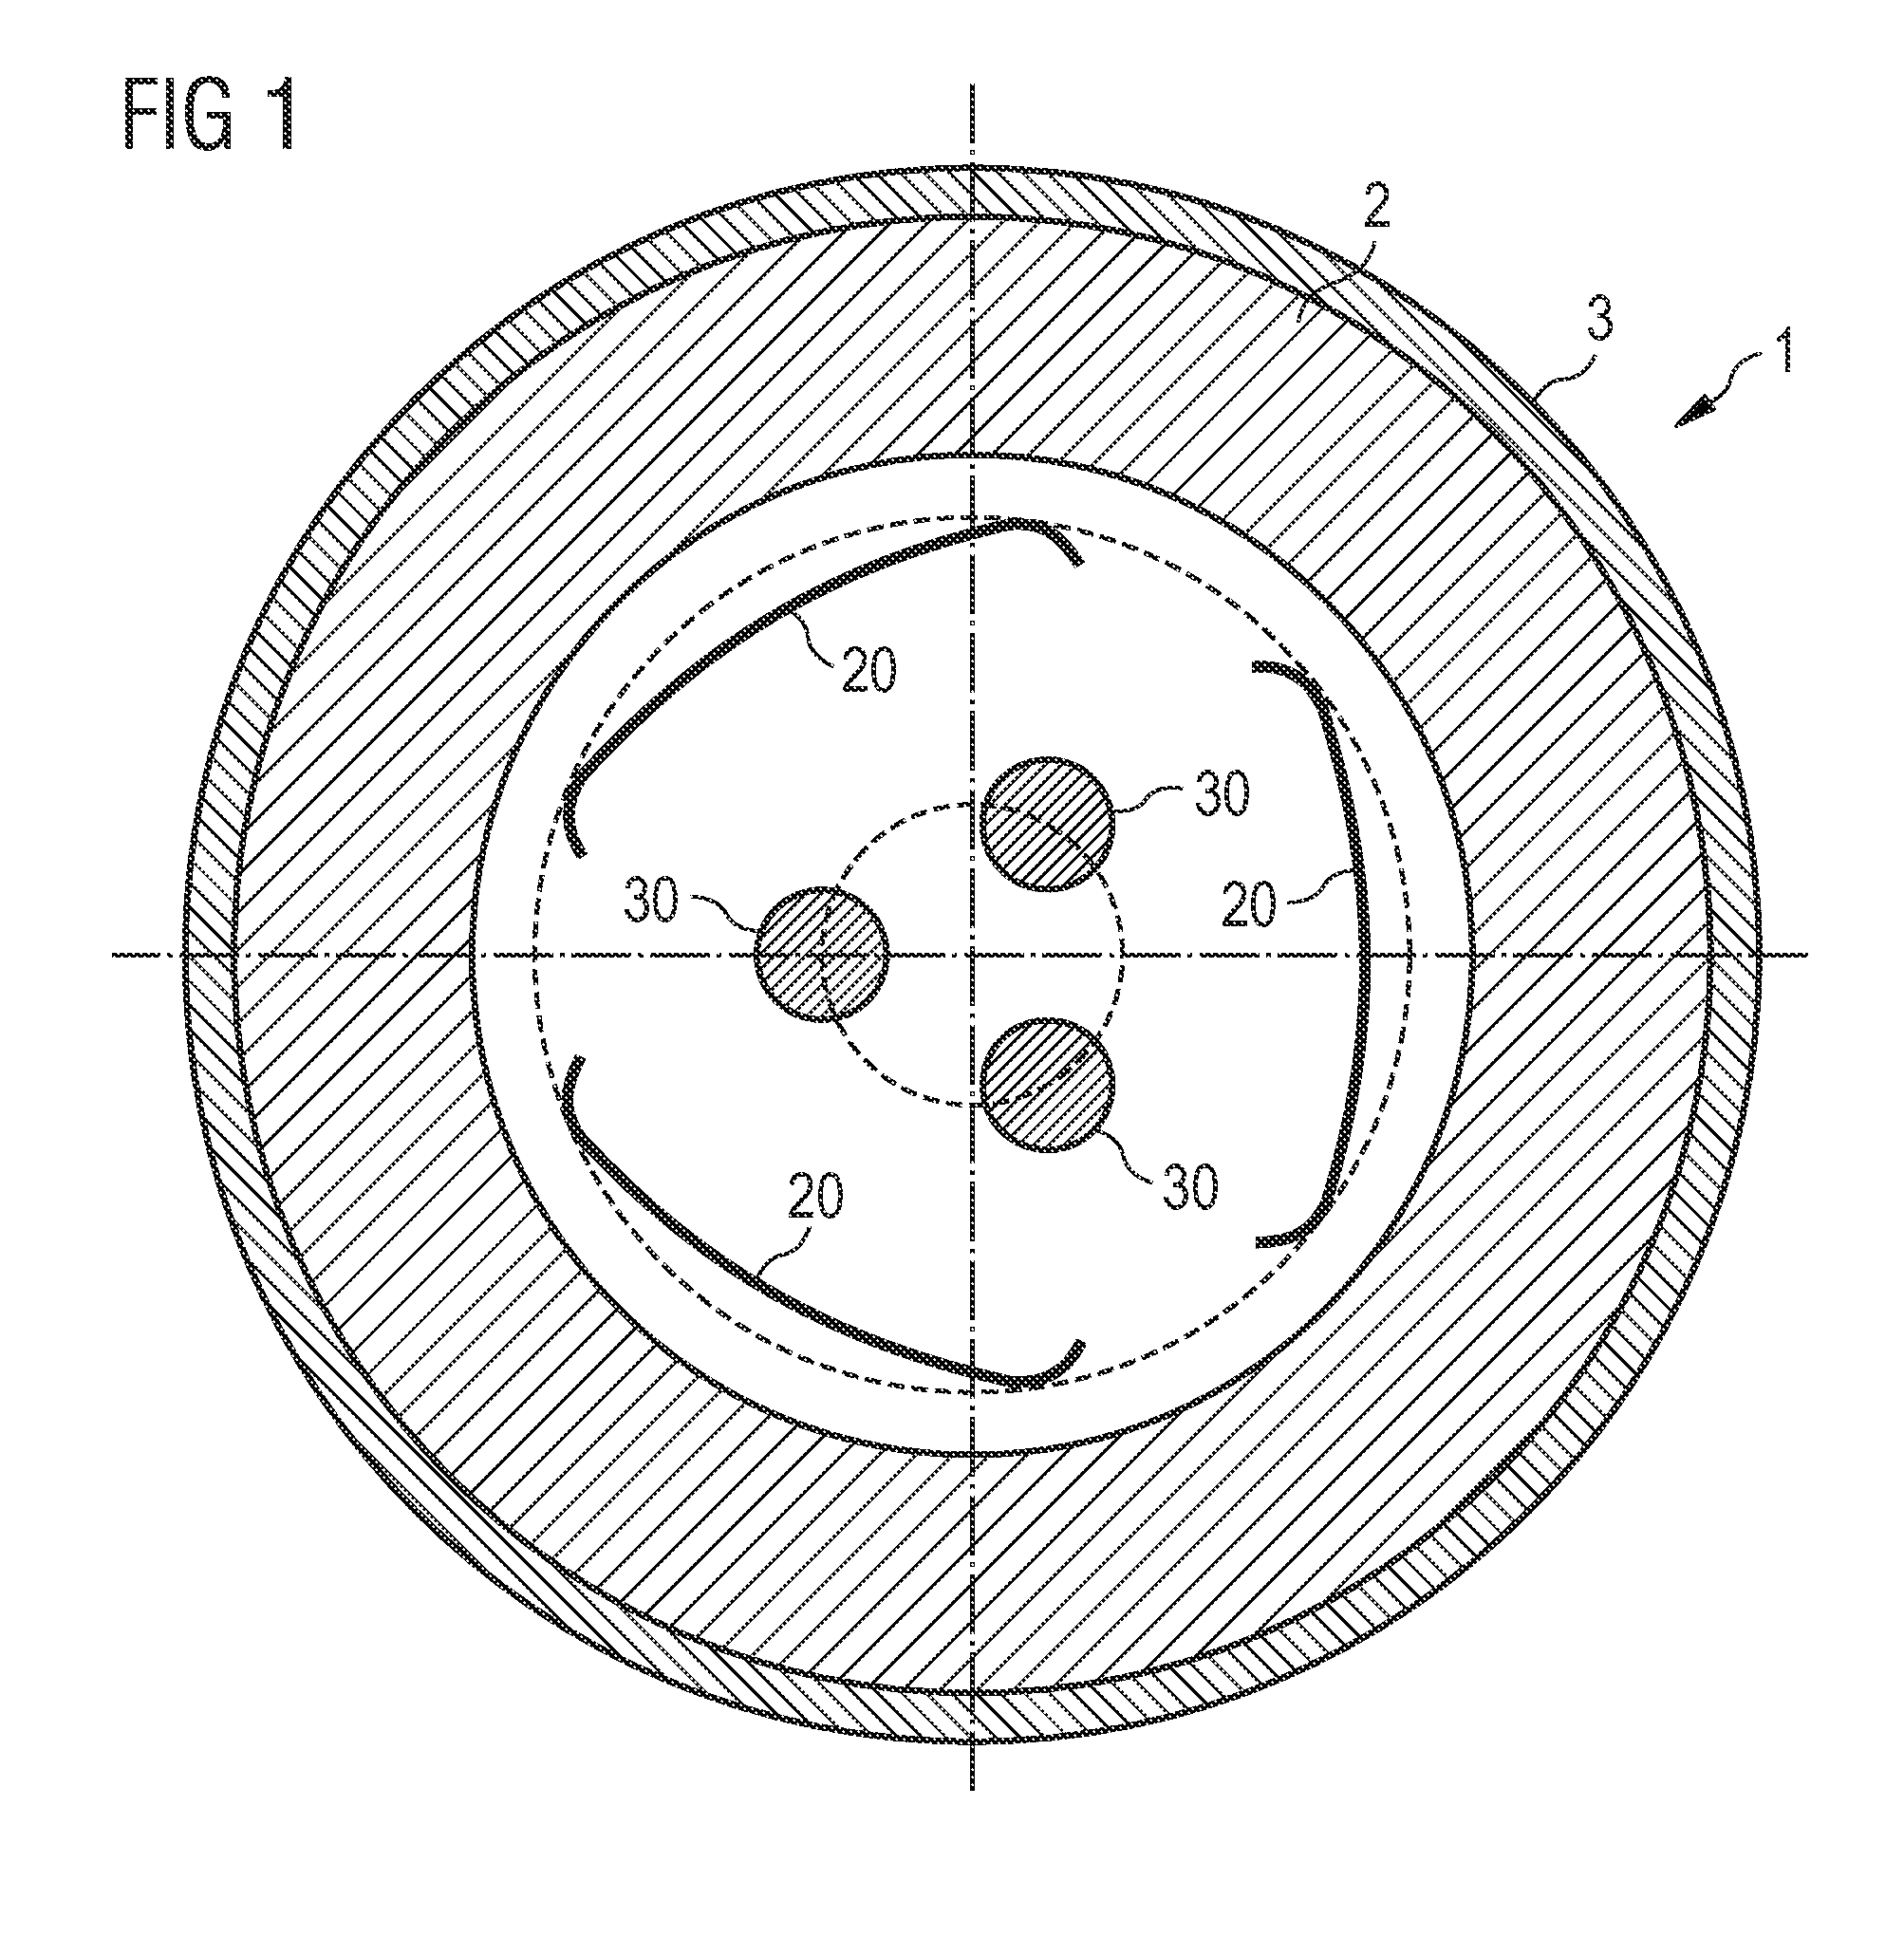 Method of applying an annular strip to a tire